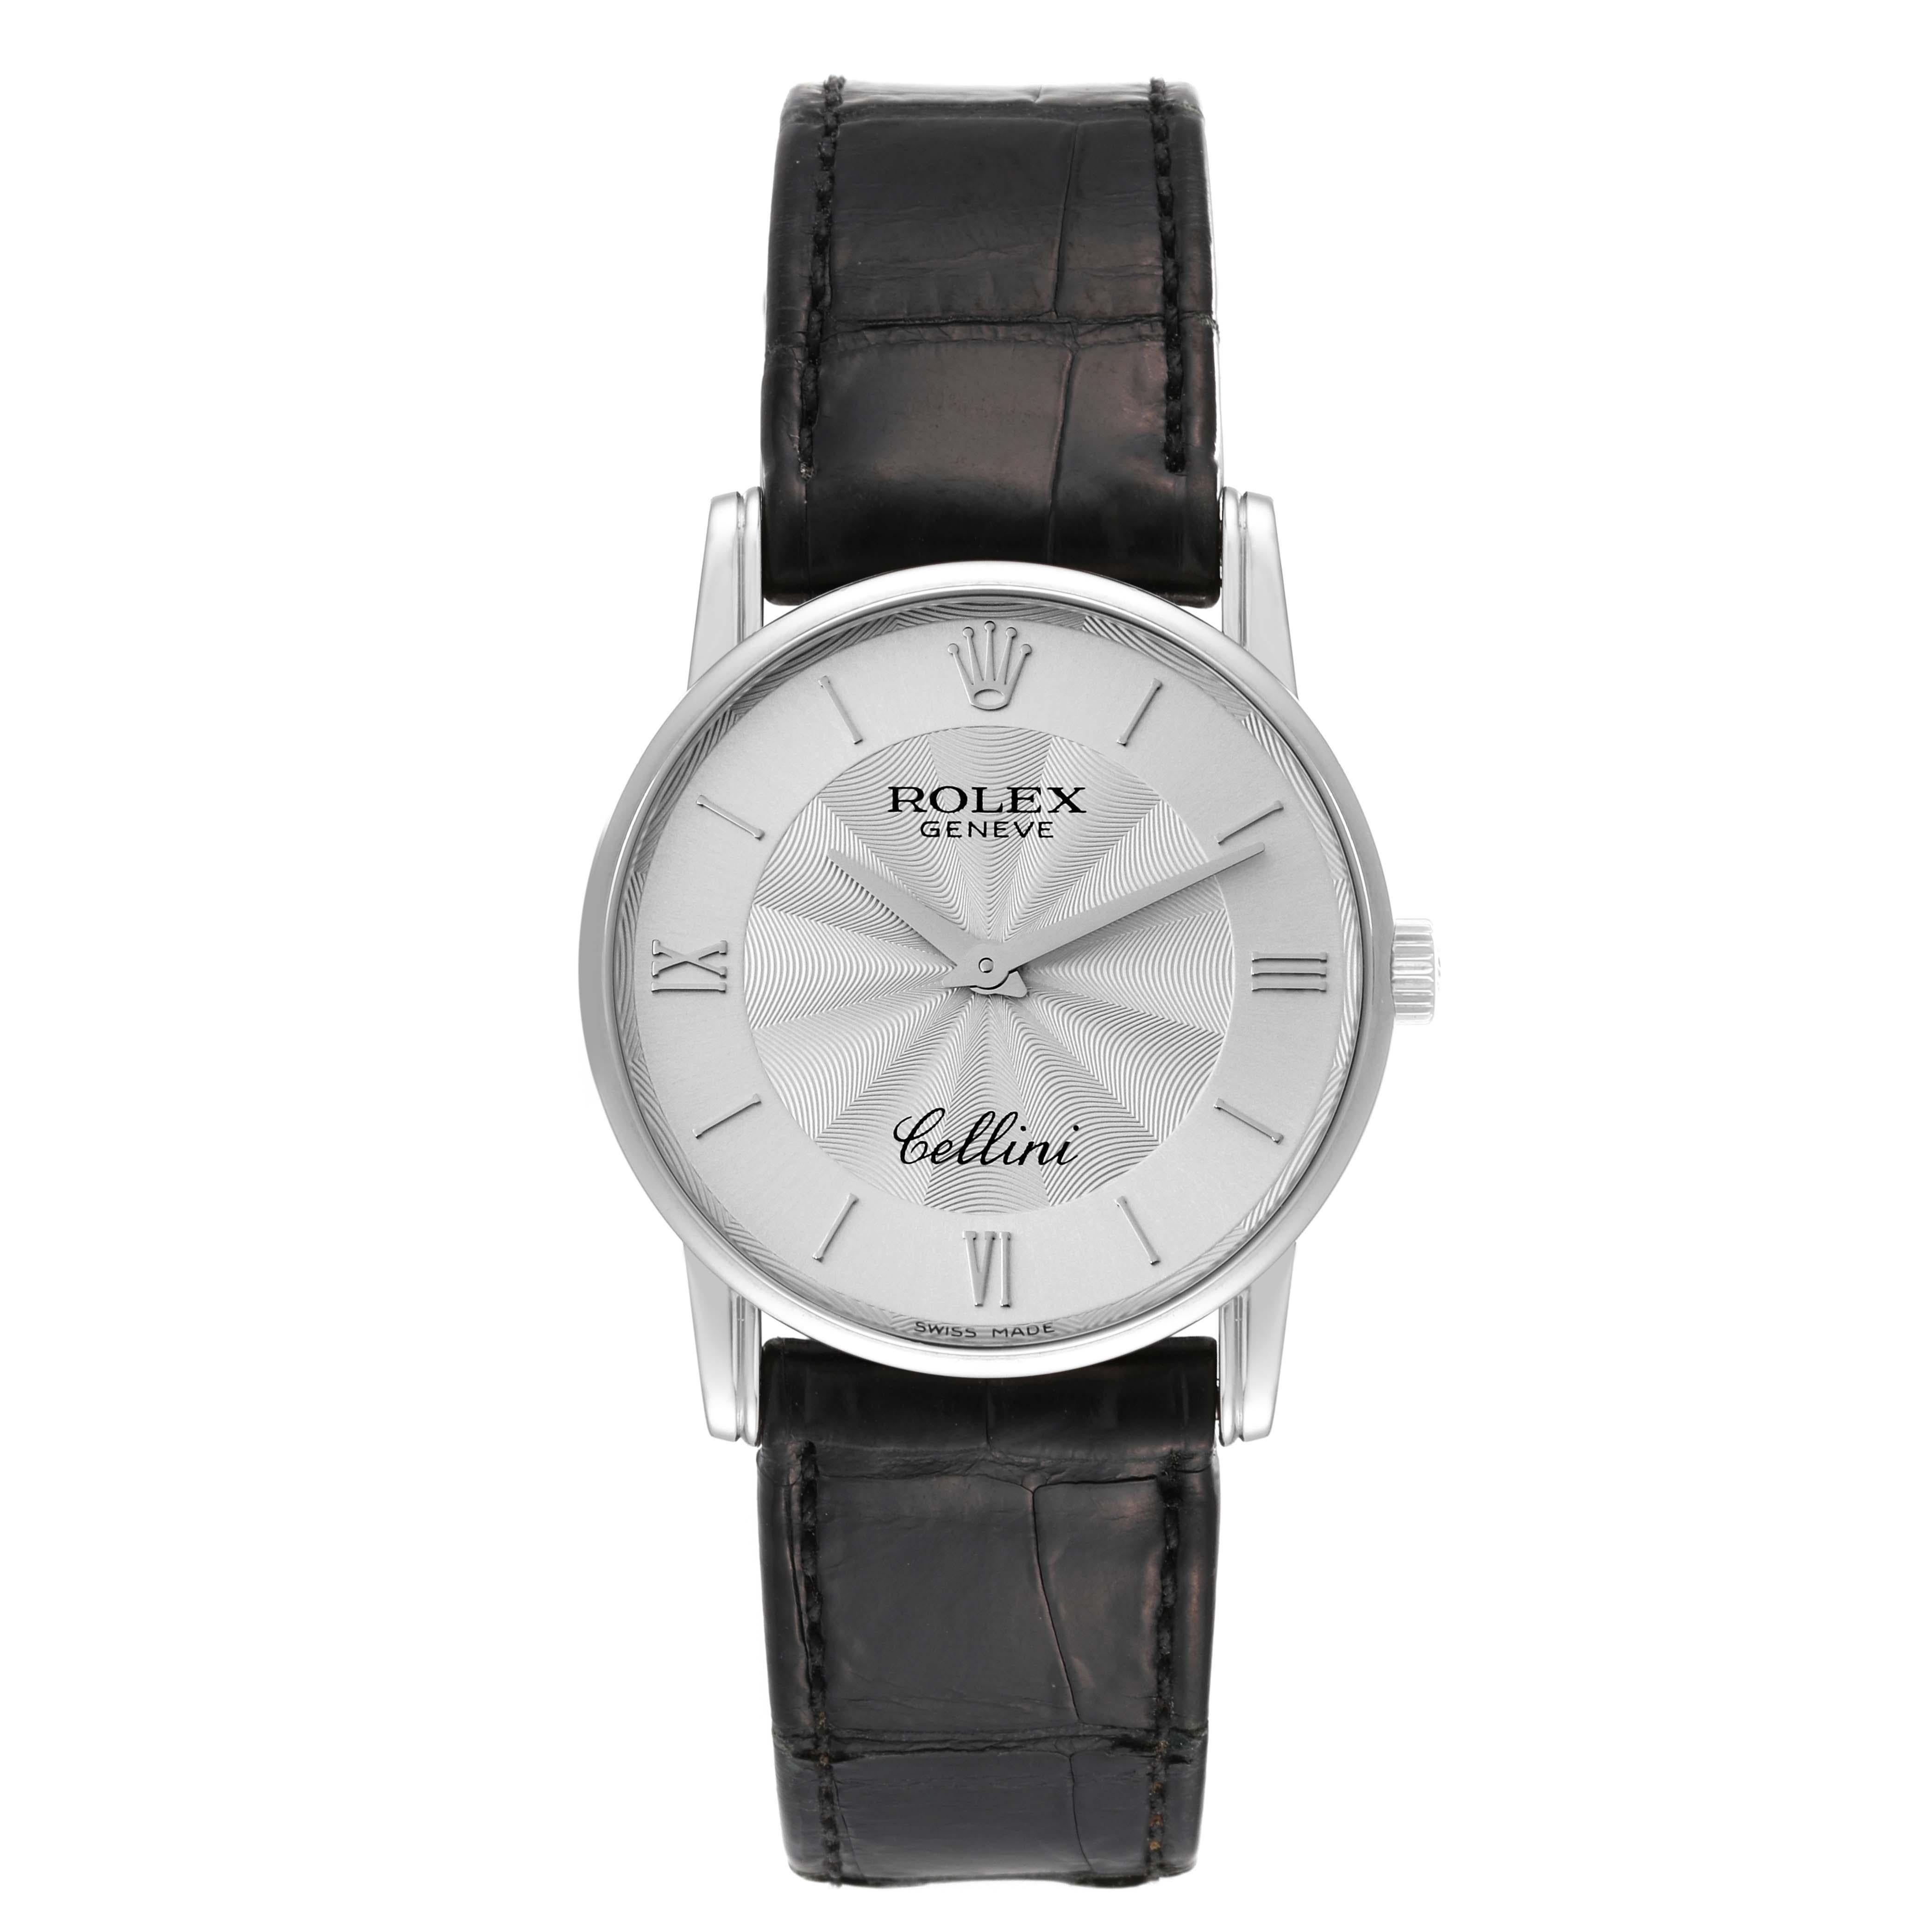 Rolex Cellini Classic White Gold Silver Guilloche Dial Mens Watch 5116. Manual winding movement. 18k white gold slim case 31.8 x 5.5 mm in diameter. Rolex logo on the crown. . Scratch resistant sapphire crystal. Flat profile. Silver dial with